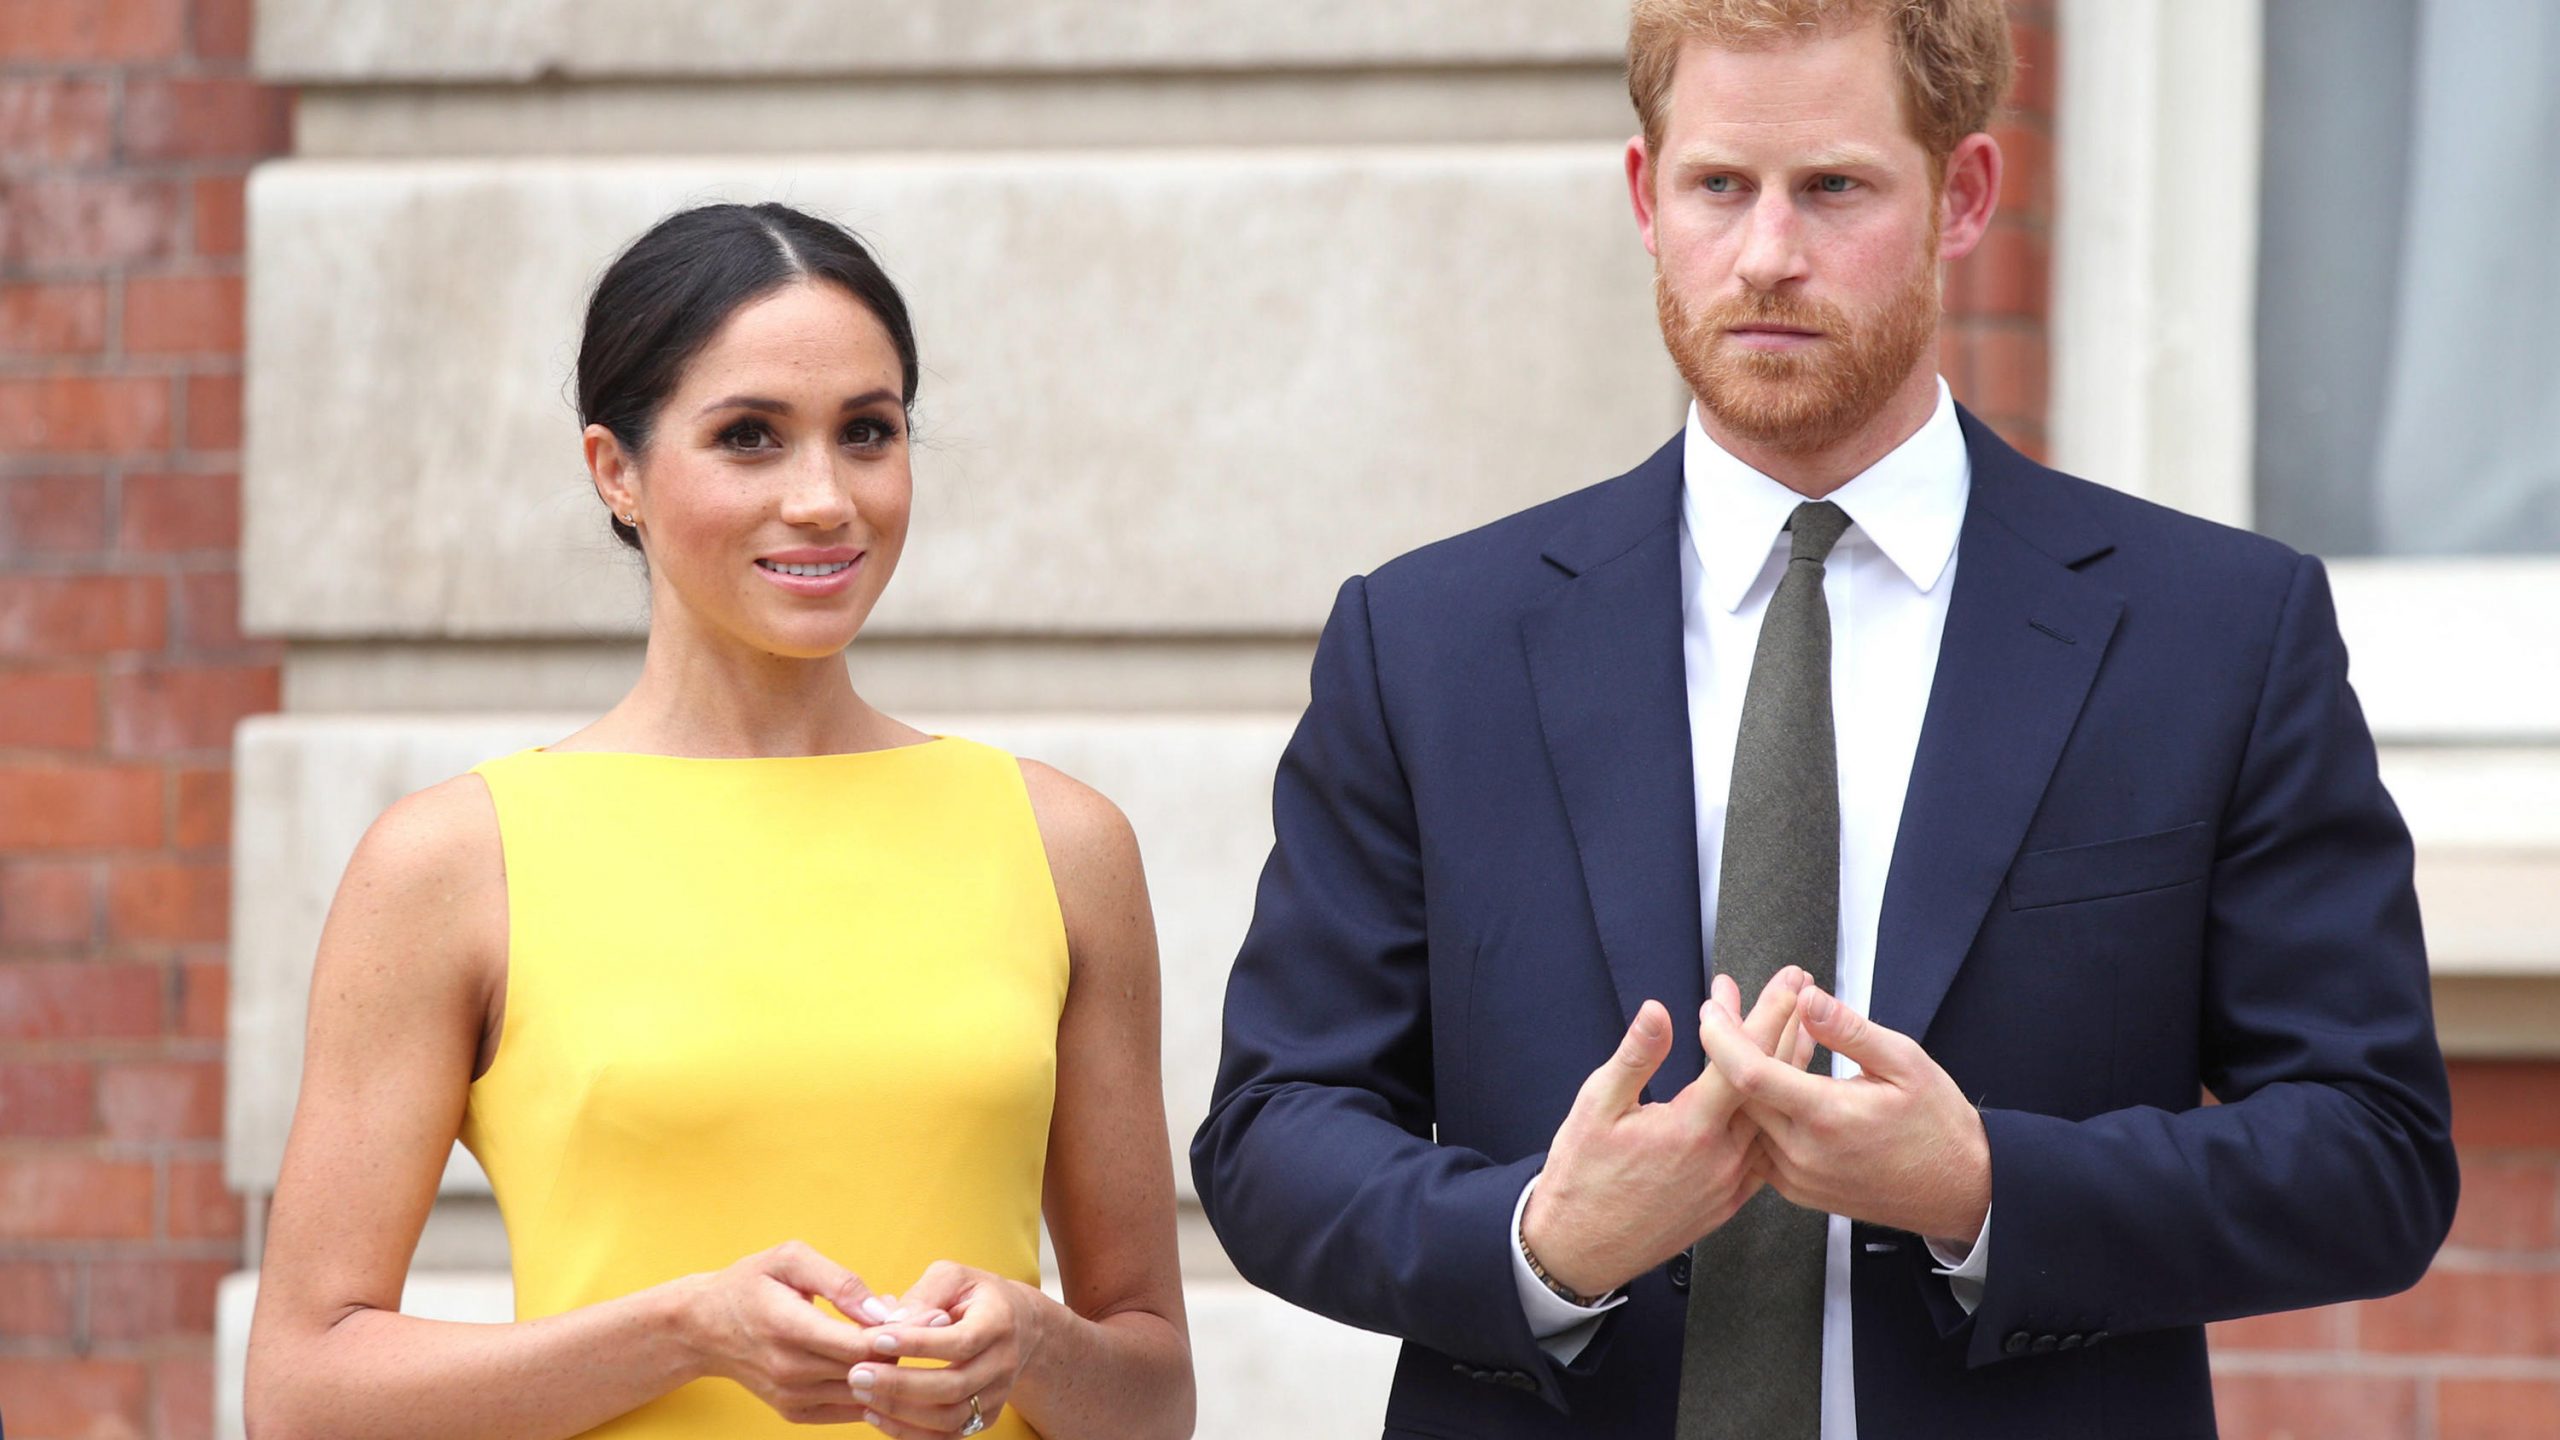 Baby Sussex grows up in this Hollywood charm!